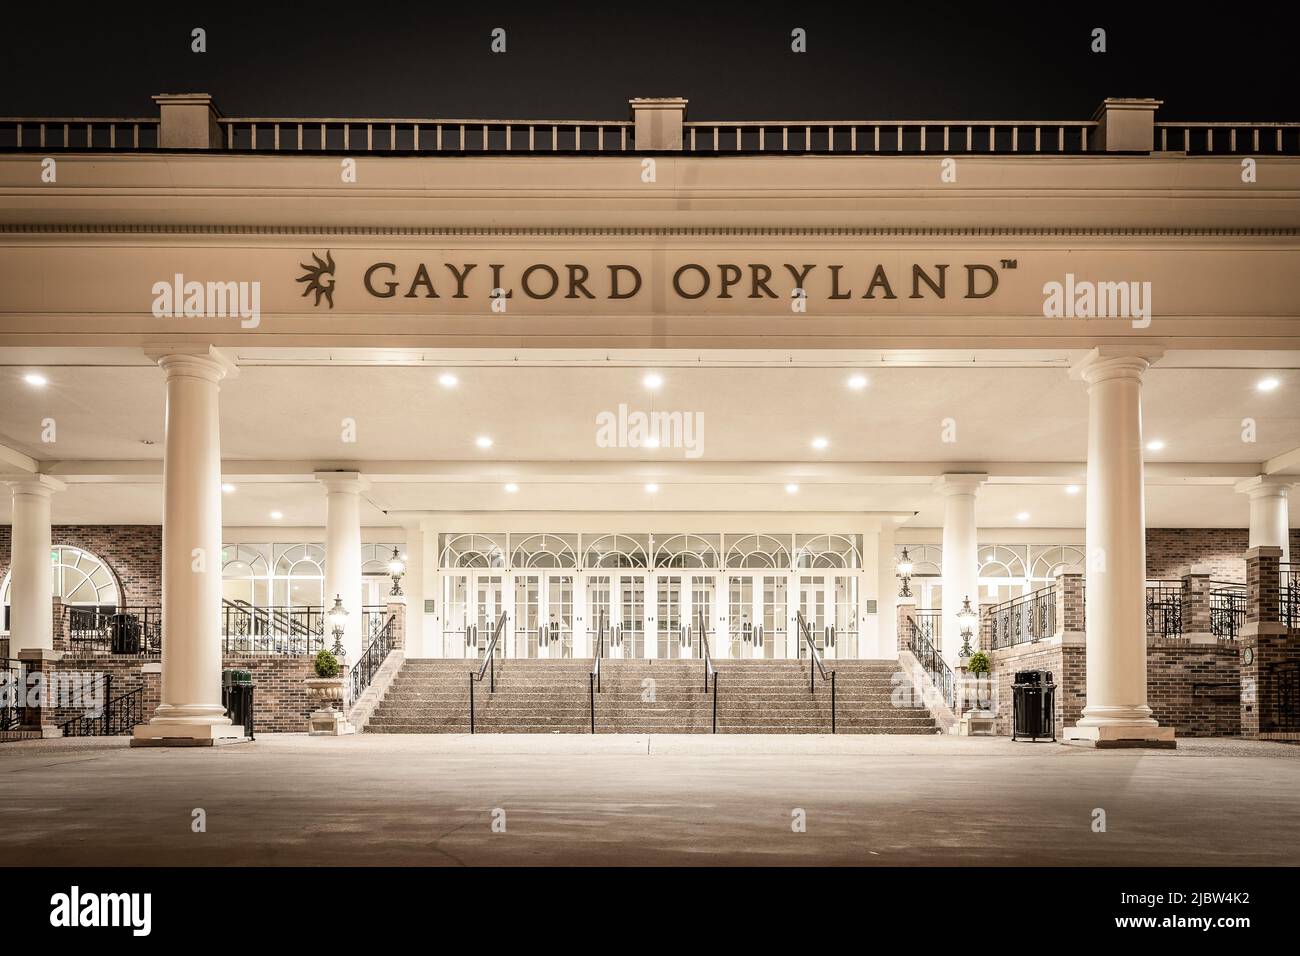 One of the entrances to the massive Gaylord Opryland Resort and Convention Center that features plenty of architecture, nature, and rooms. Stock Photo